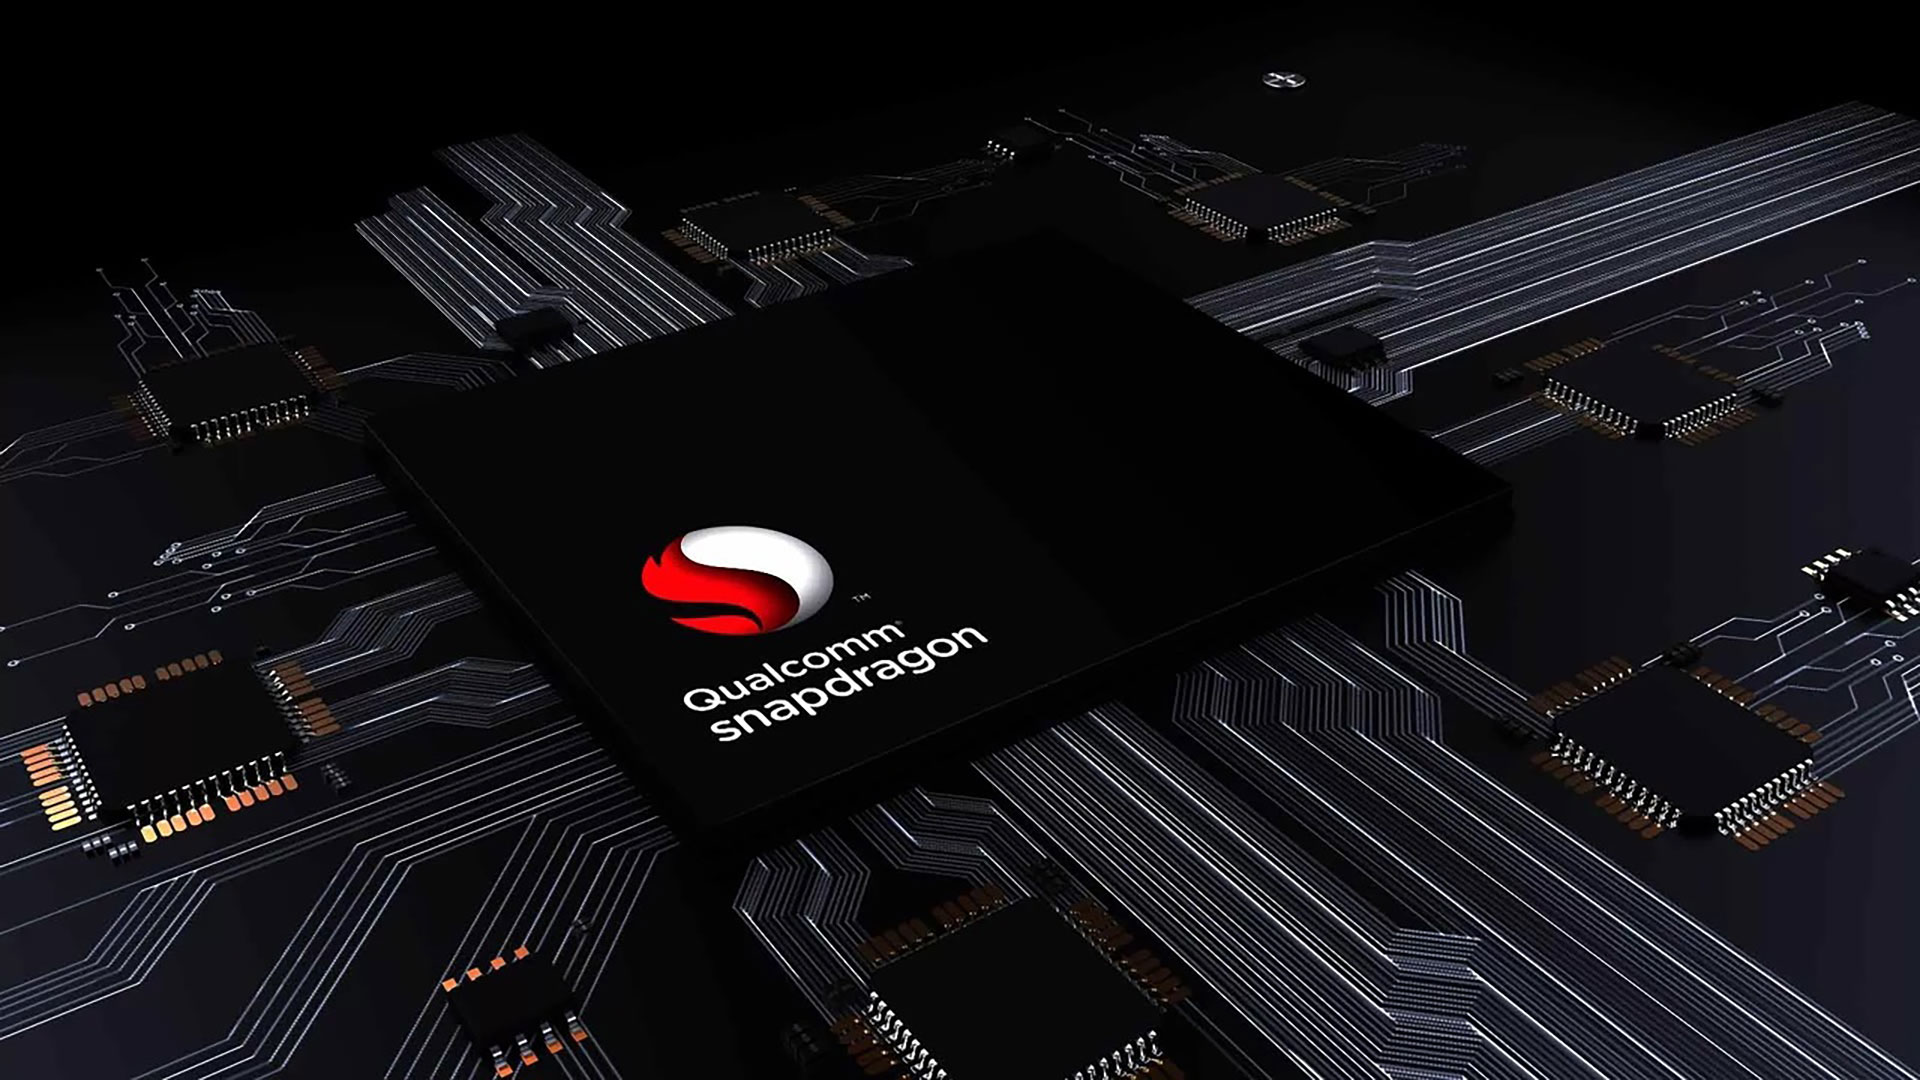 The Snapdragon 8 Gen 4 seems to have power consumption issues, but there is still plenty of time to resolve them